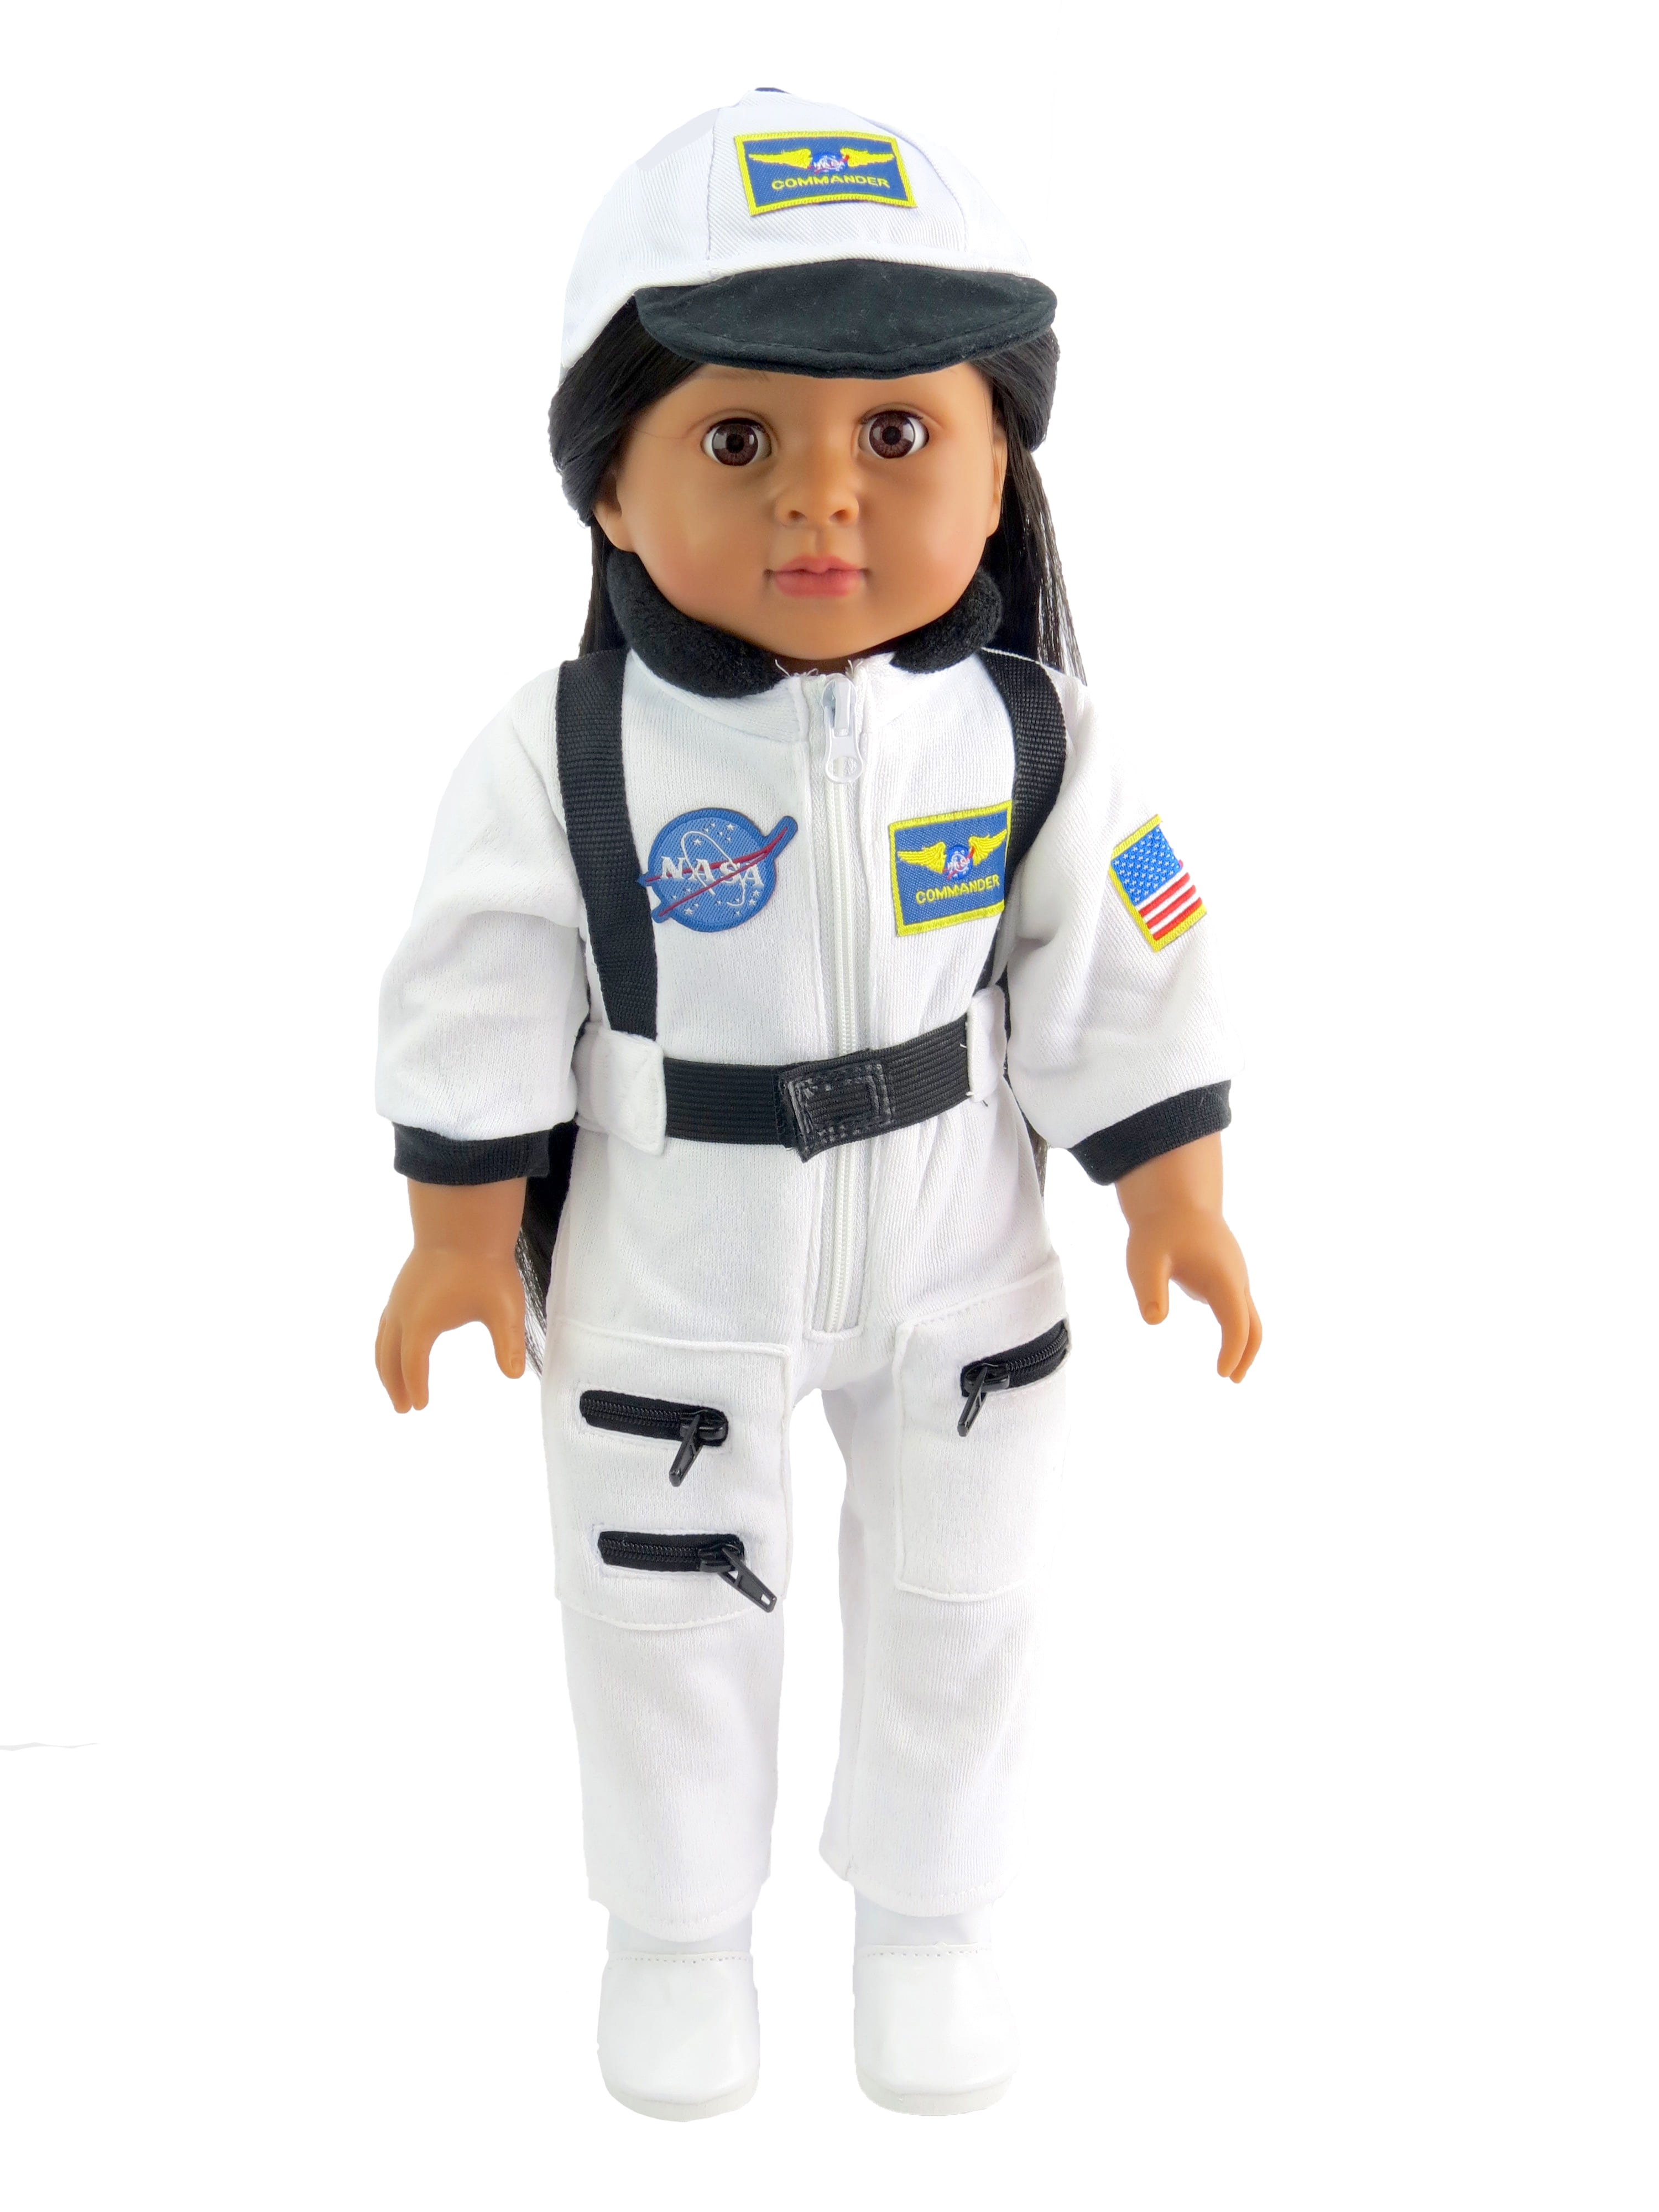 18" American Girl Doll Astronaut NASA Figurine kit  for18'' doll accessories 